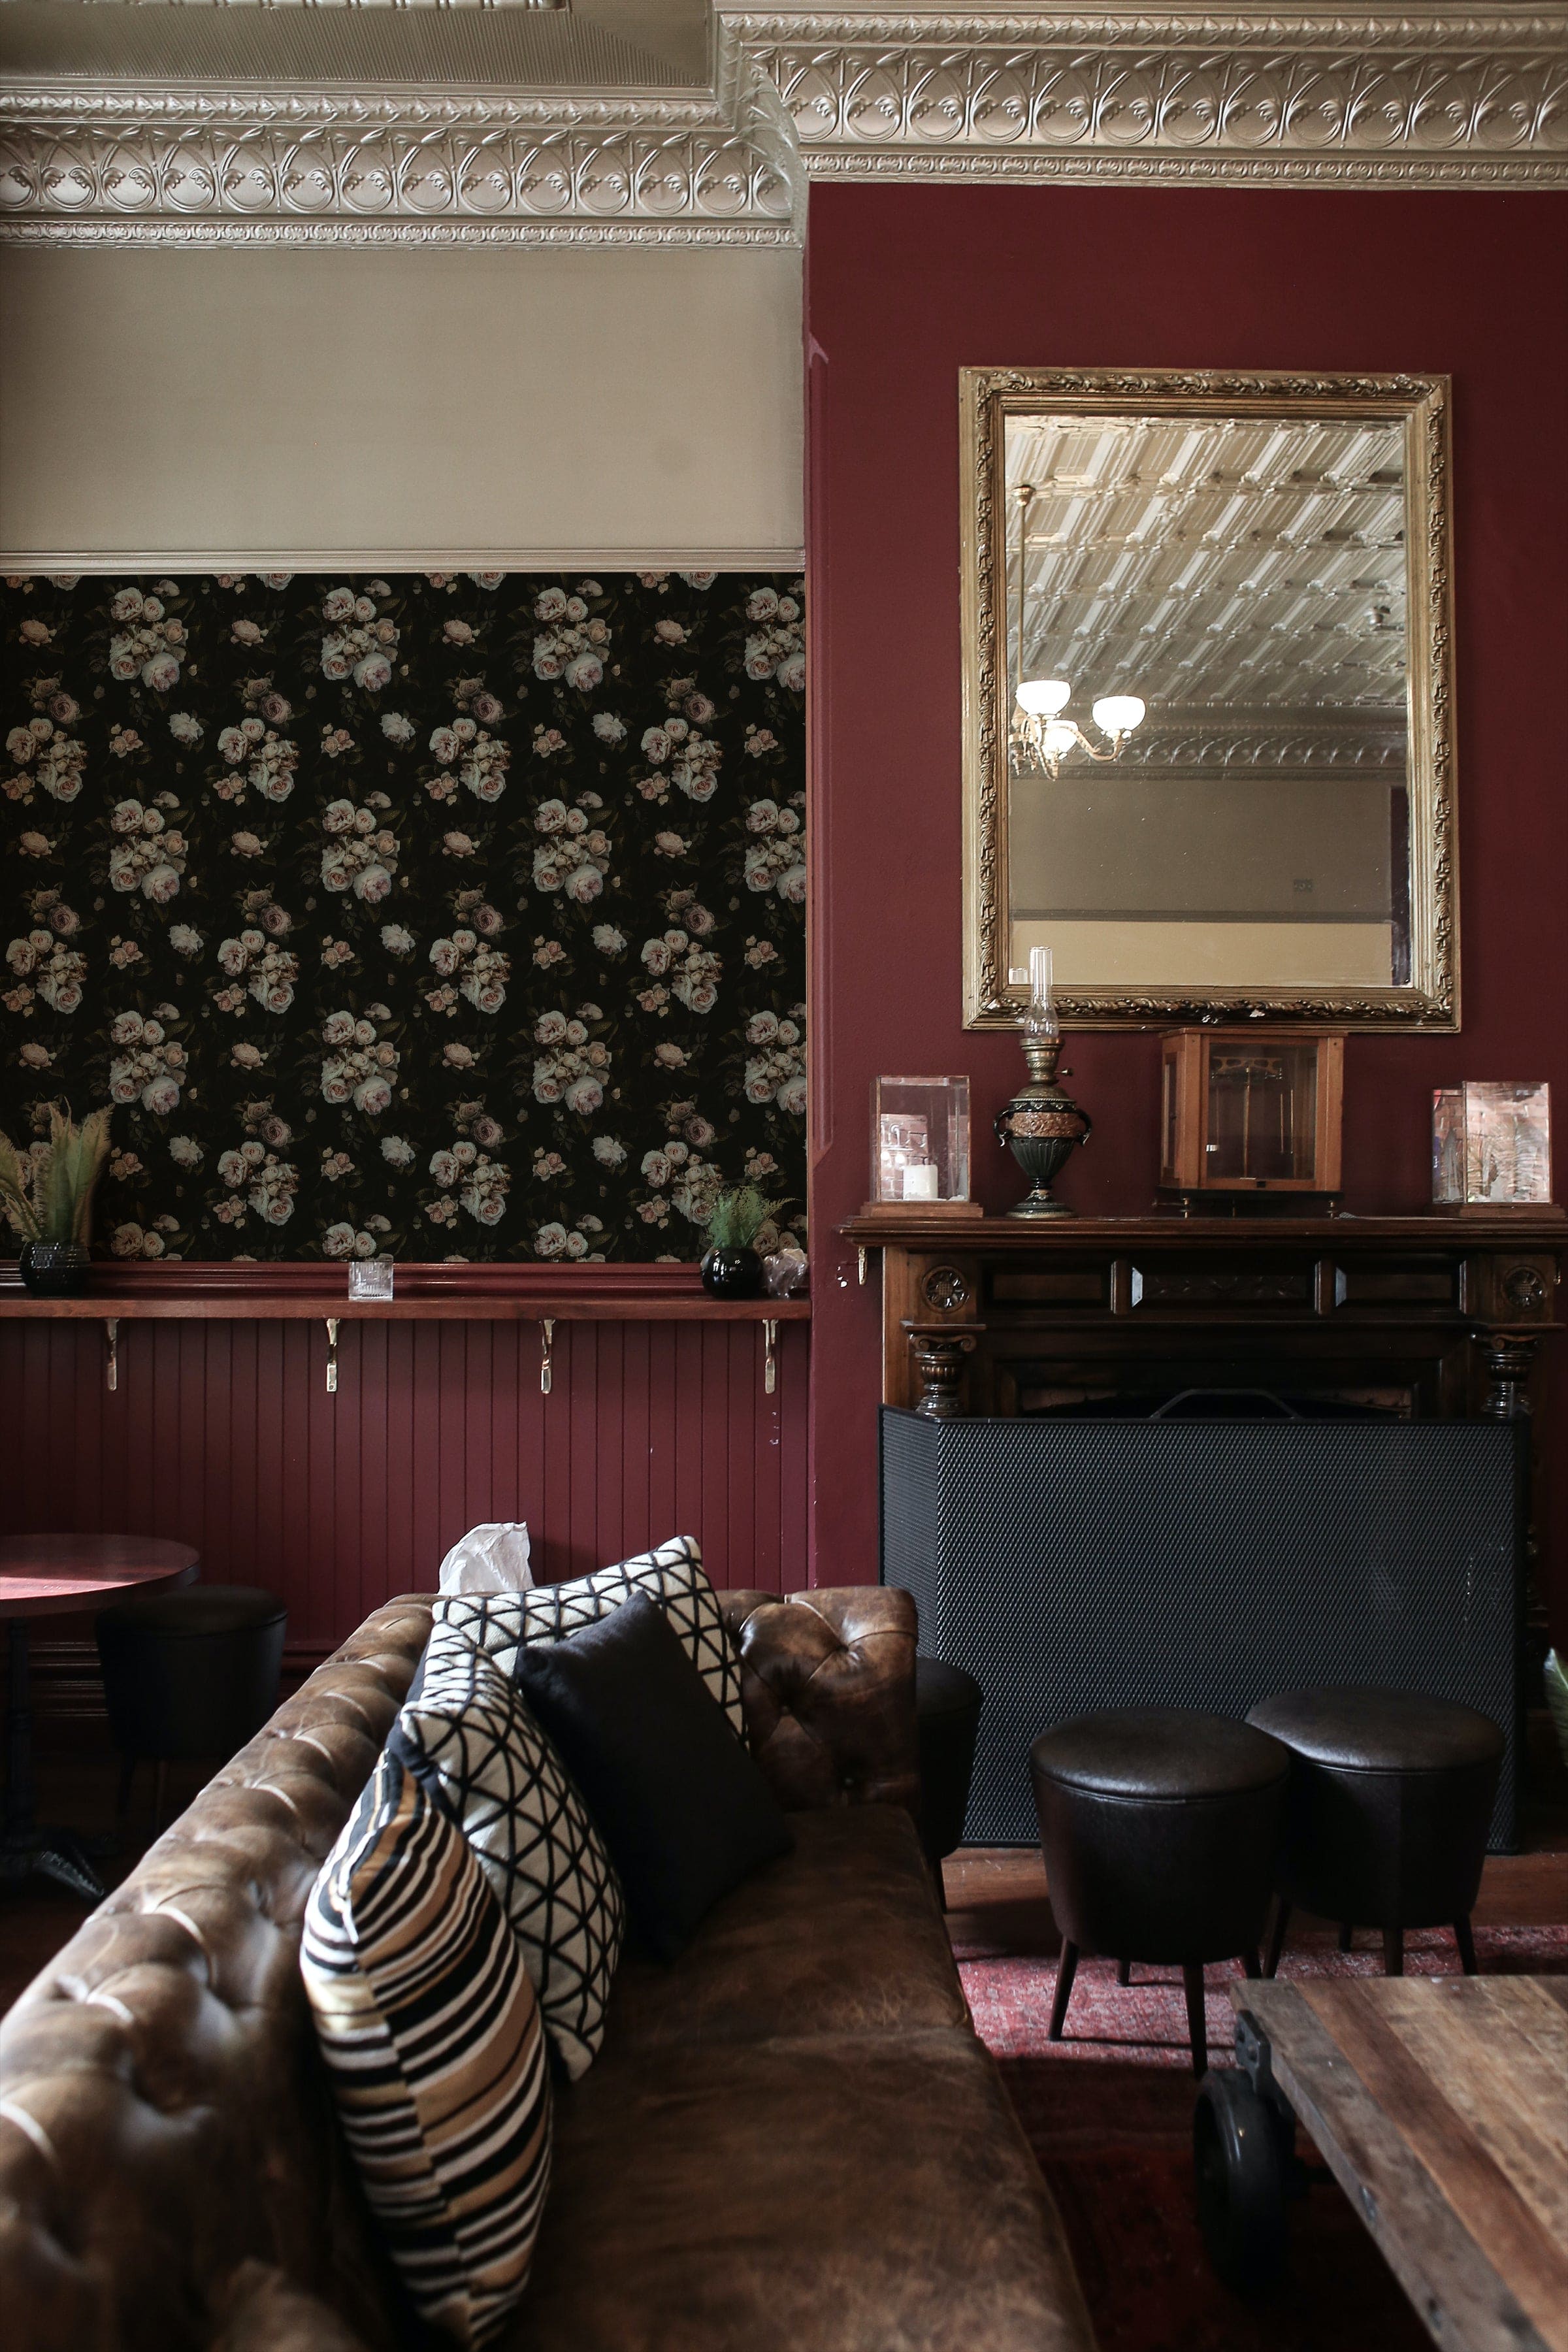 A stylish interior setting featuring the Dark Rose Wallpaper used as a dramatic accent wall in a lounge area. The deep tones of the roses complement the vintage leather sofa and classic decor elements, enhancing the room's sophisticated, dark aesthetic.